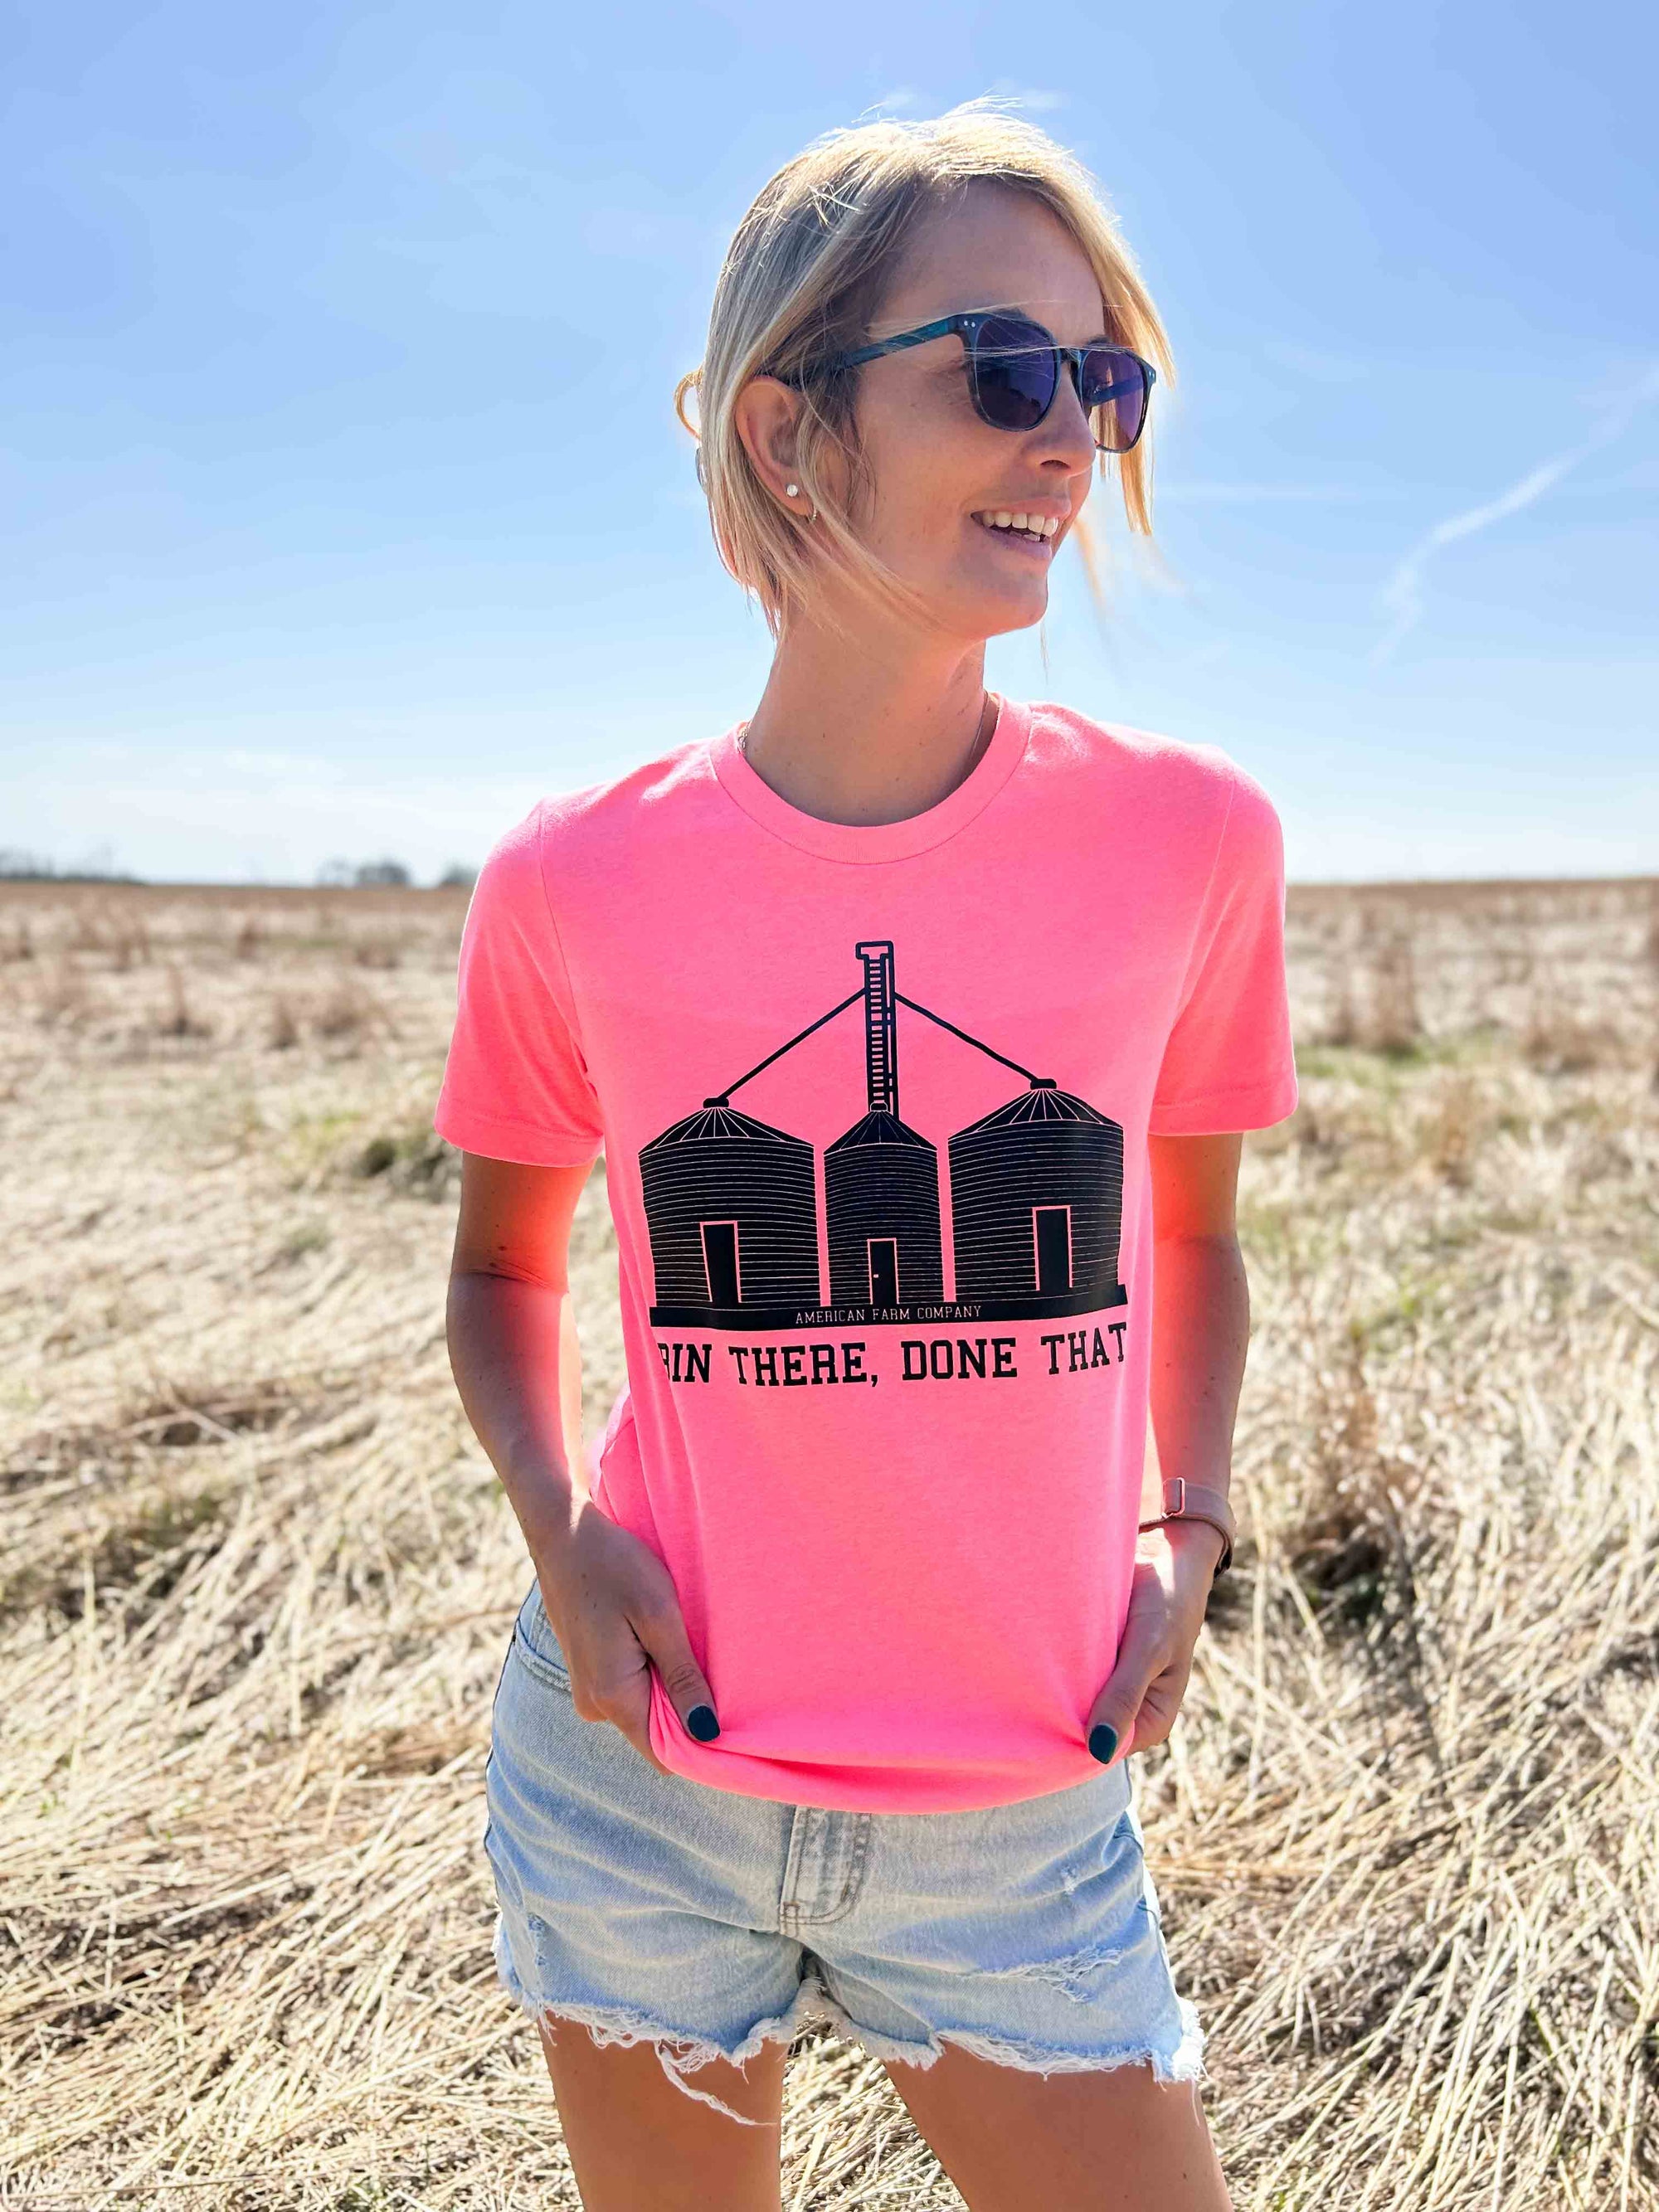 American Farm Company Shirts 'Bin There Done That' Pink Tee